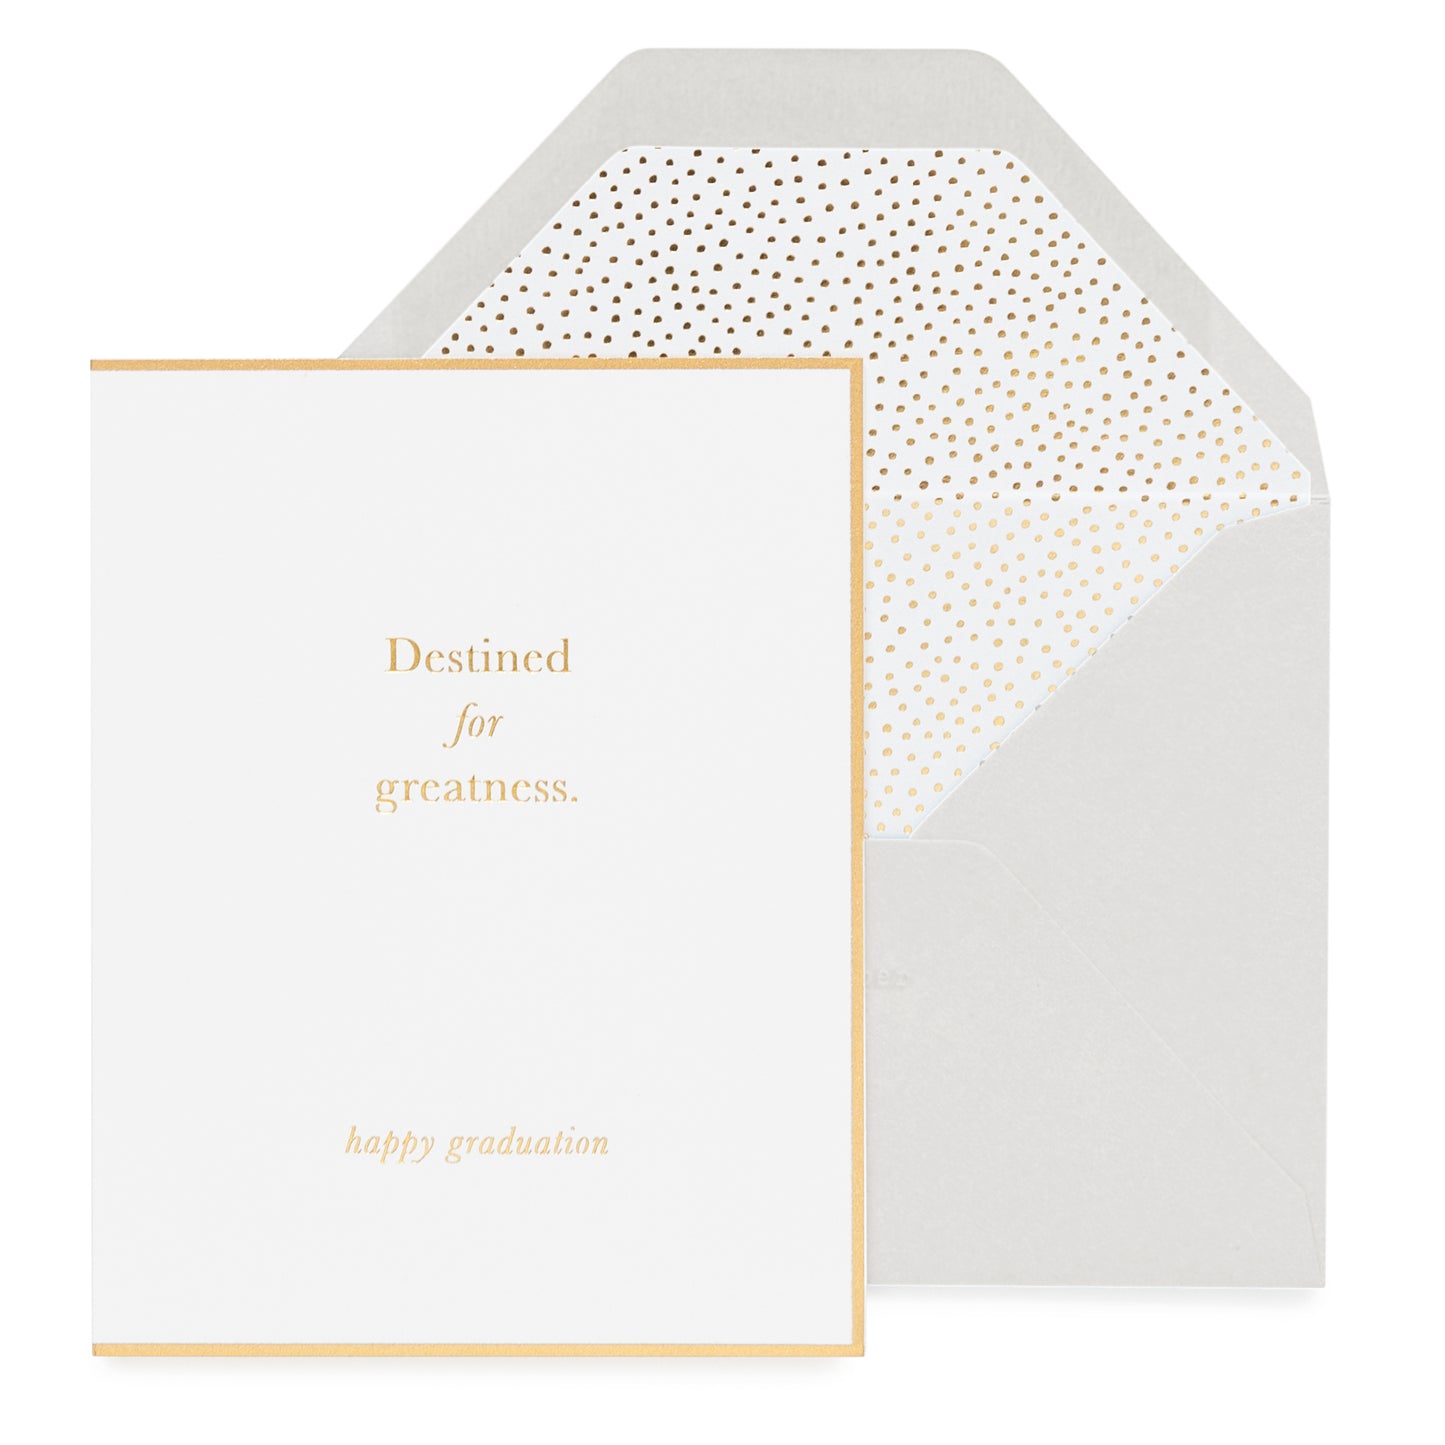 Gold foil destined for greatness card with a grey envelope